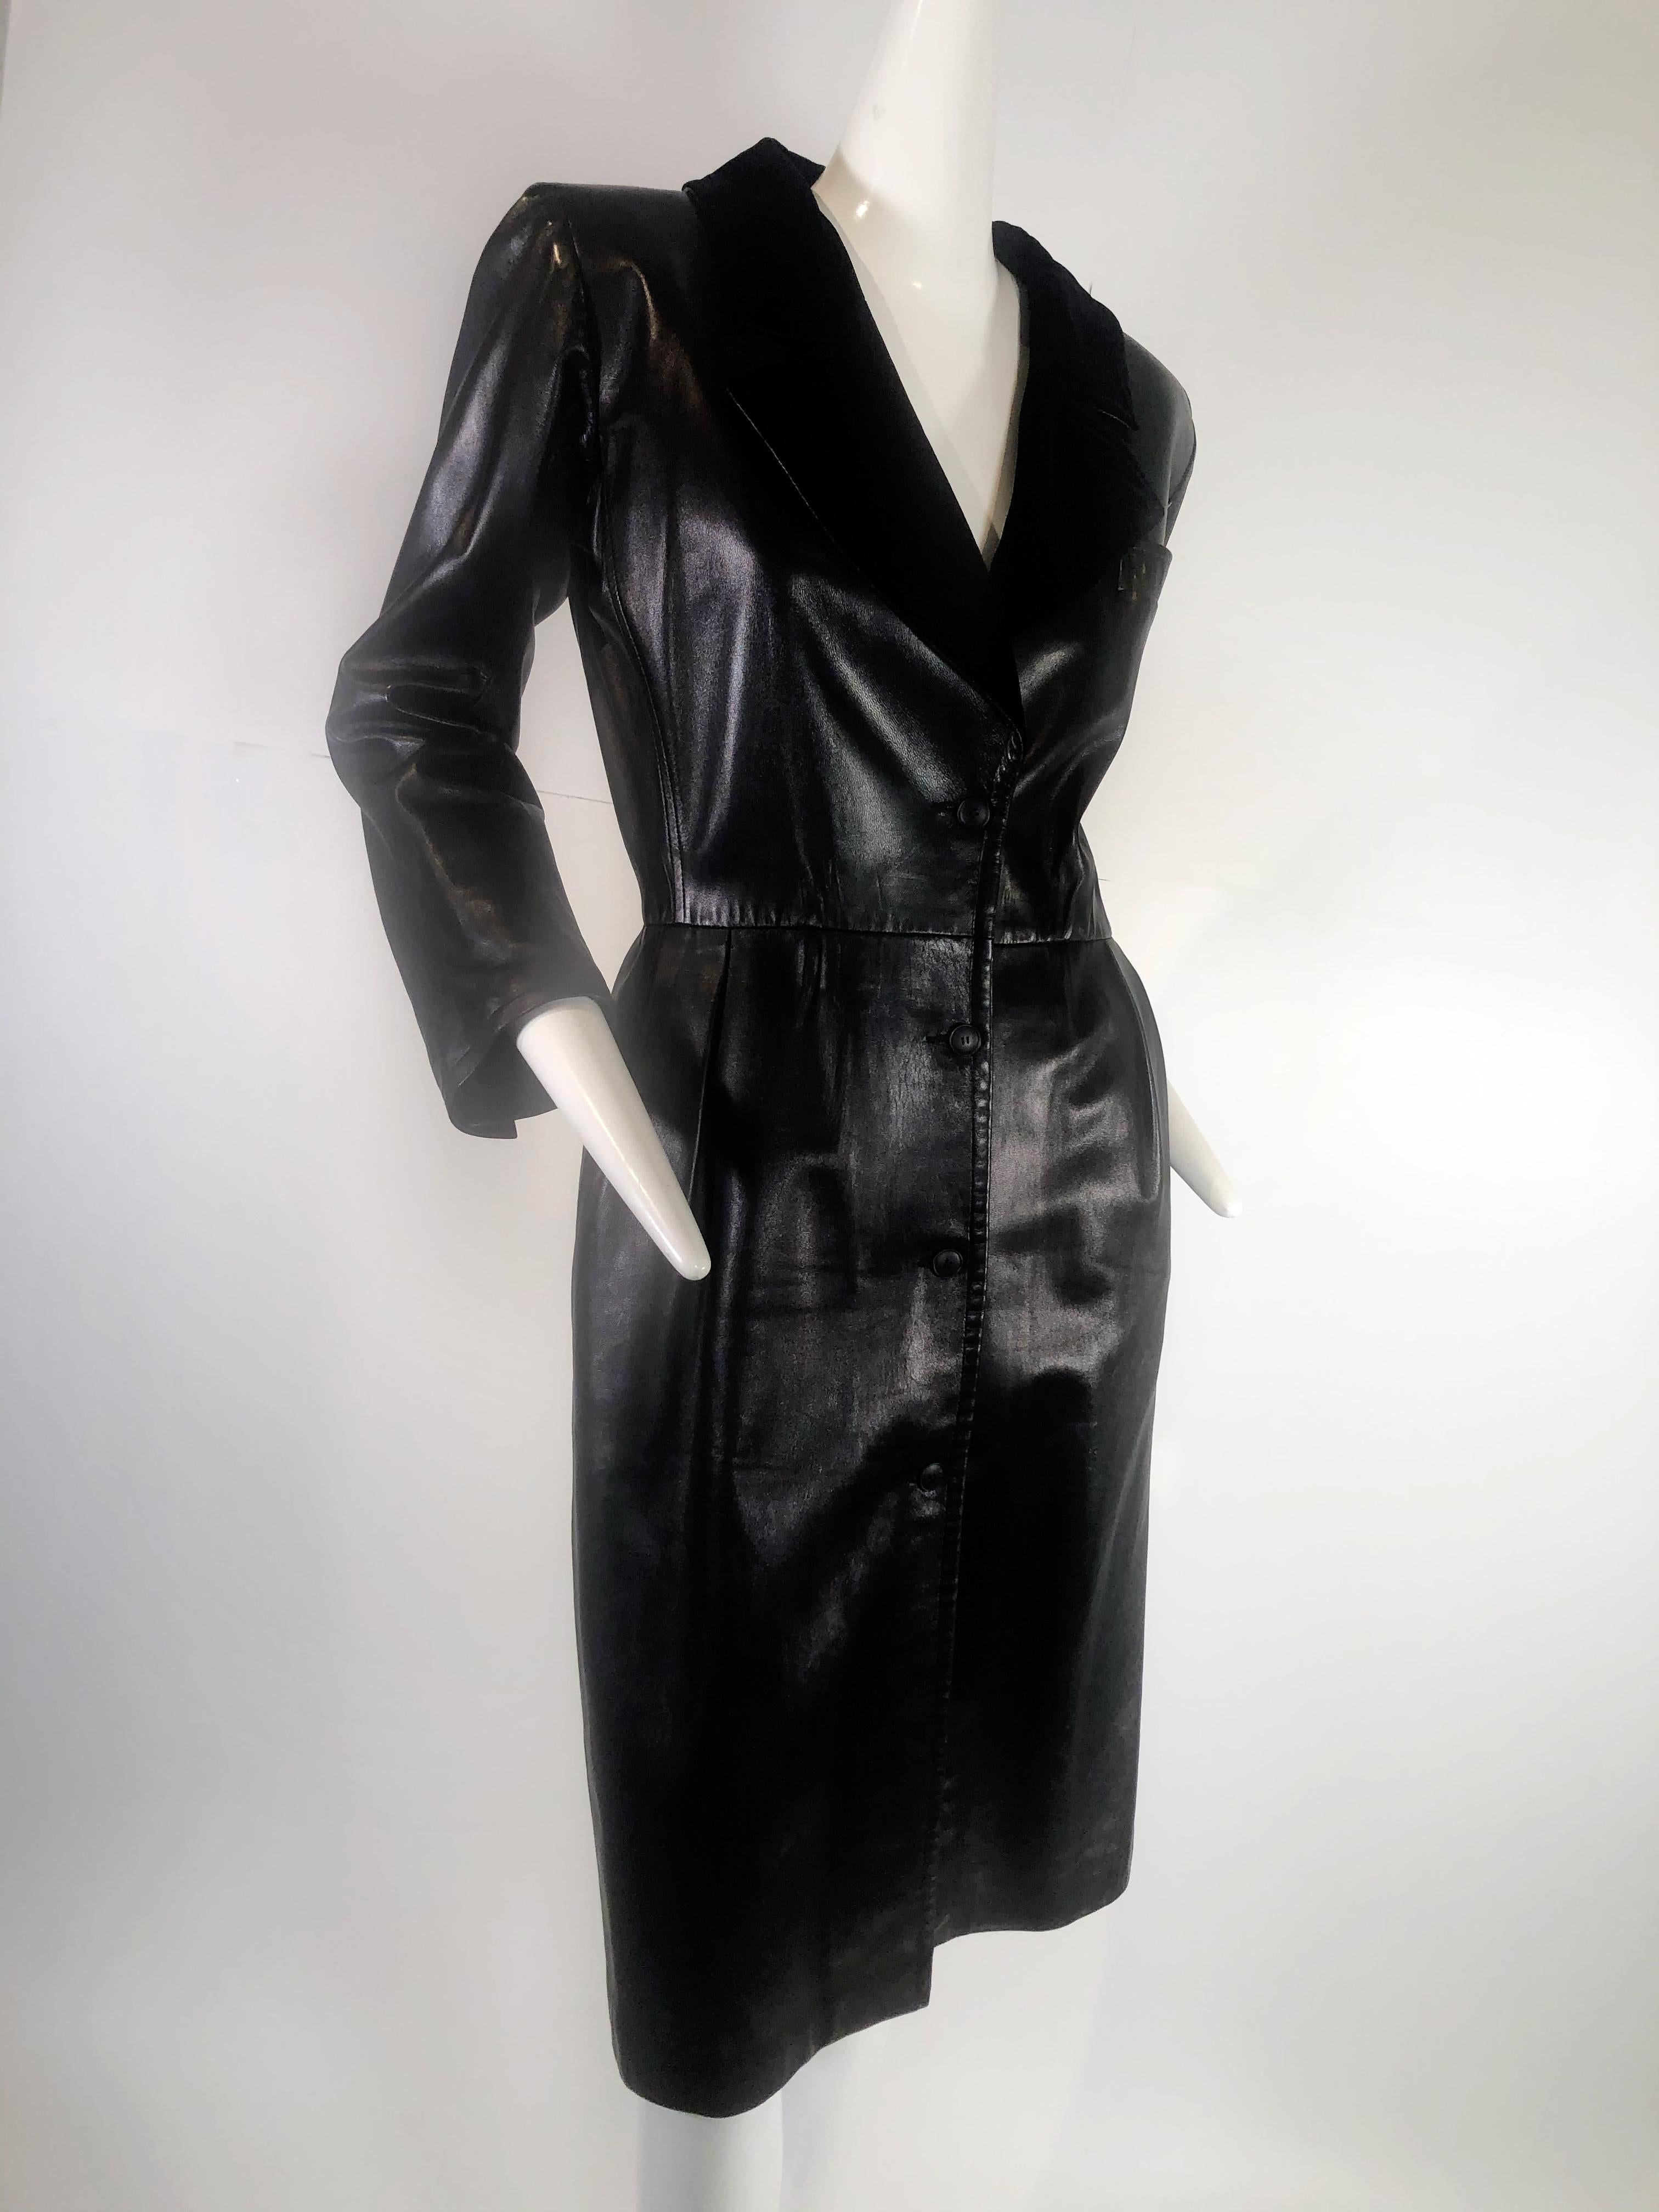 A sexy 1980s Yves Saint Laurent fitted black lambskin tuxedo dress w sculpted waist and hip. Fully lined with shoulder padding. Fits a modern US size 2-4. See measurement card for exact fit.